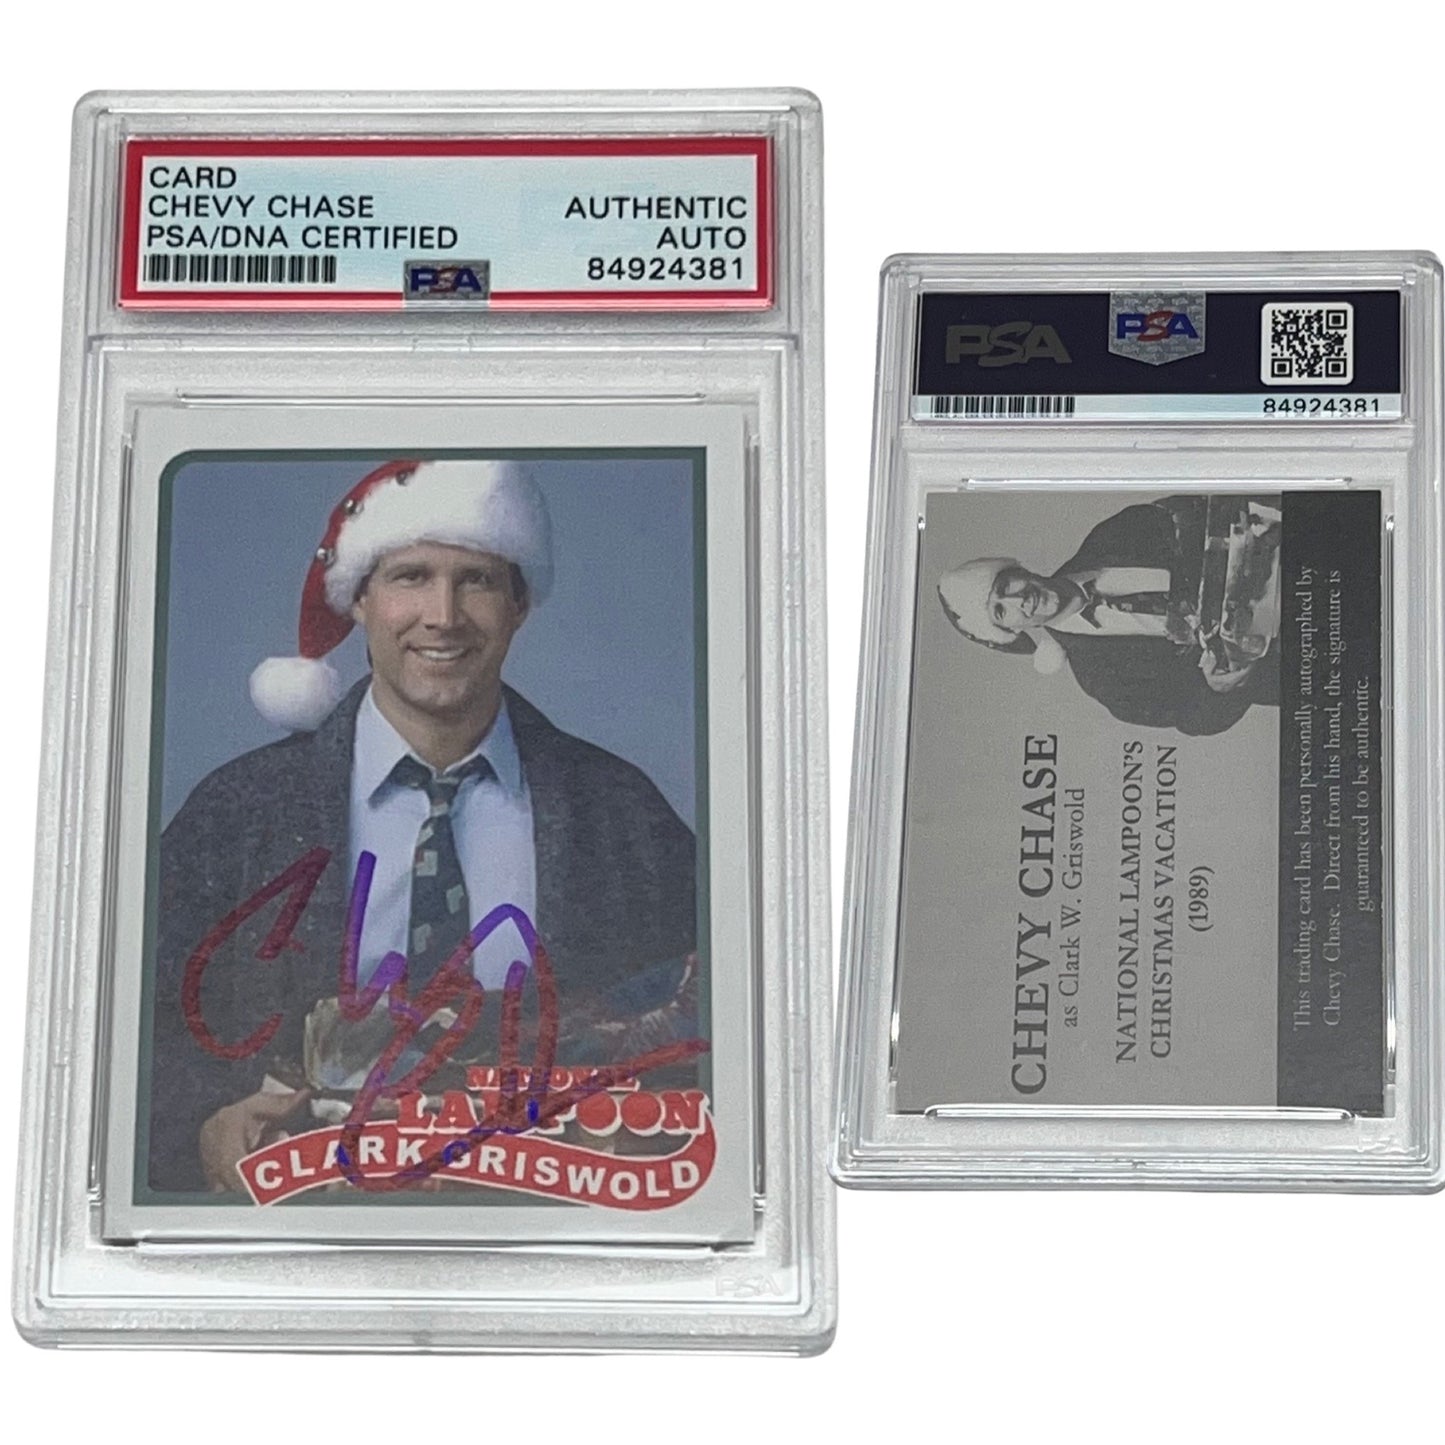 Chevy Chase National Lampoons Christmas Vacation Clark Griswold Autographed Card PSA Auto Authentic